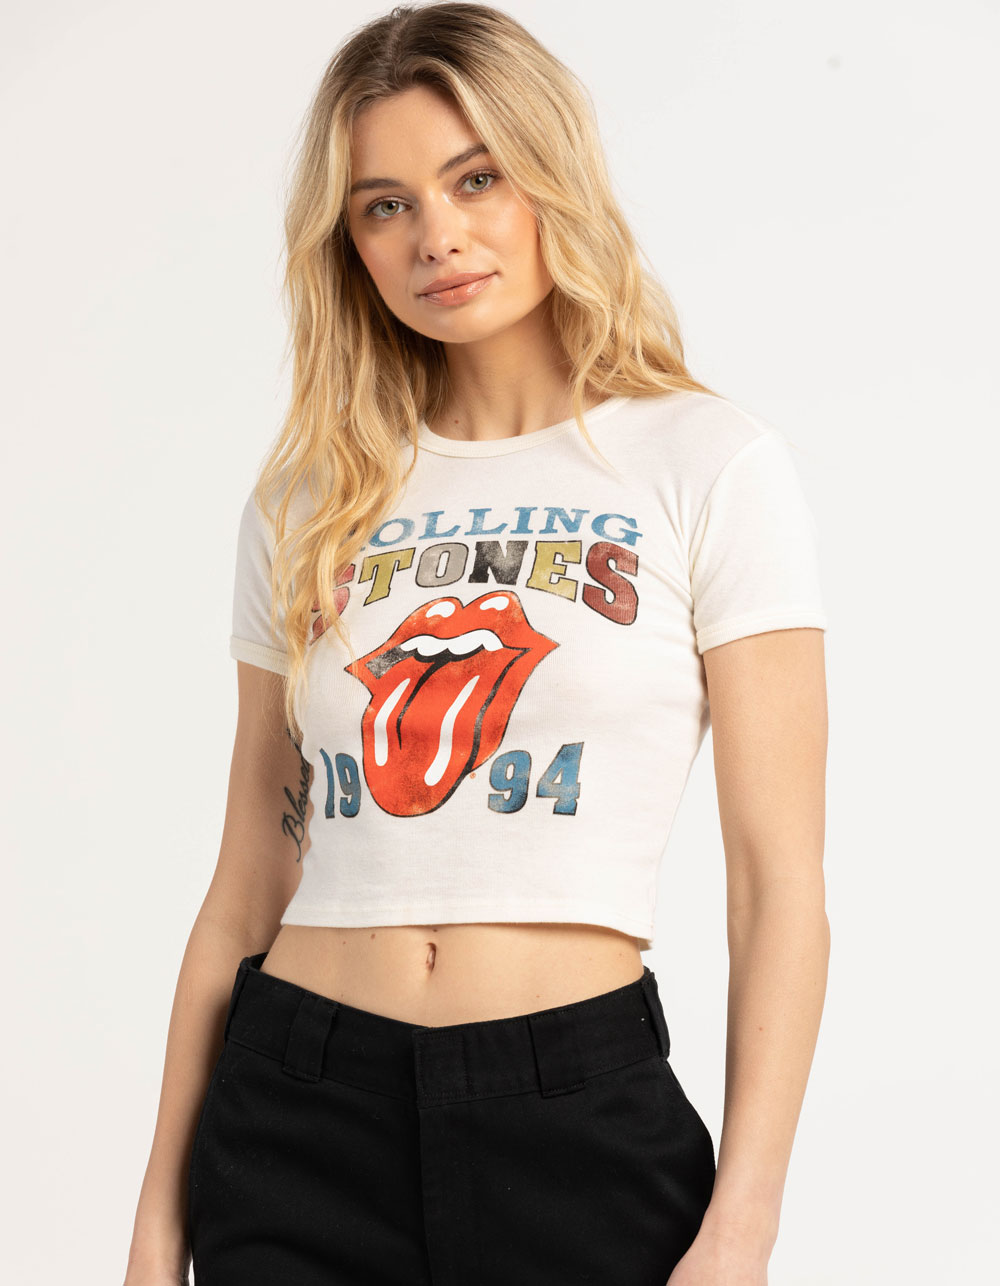 ROLLING STONES Womens Baby Tee - NATURAL | Tillys